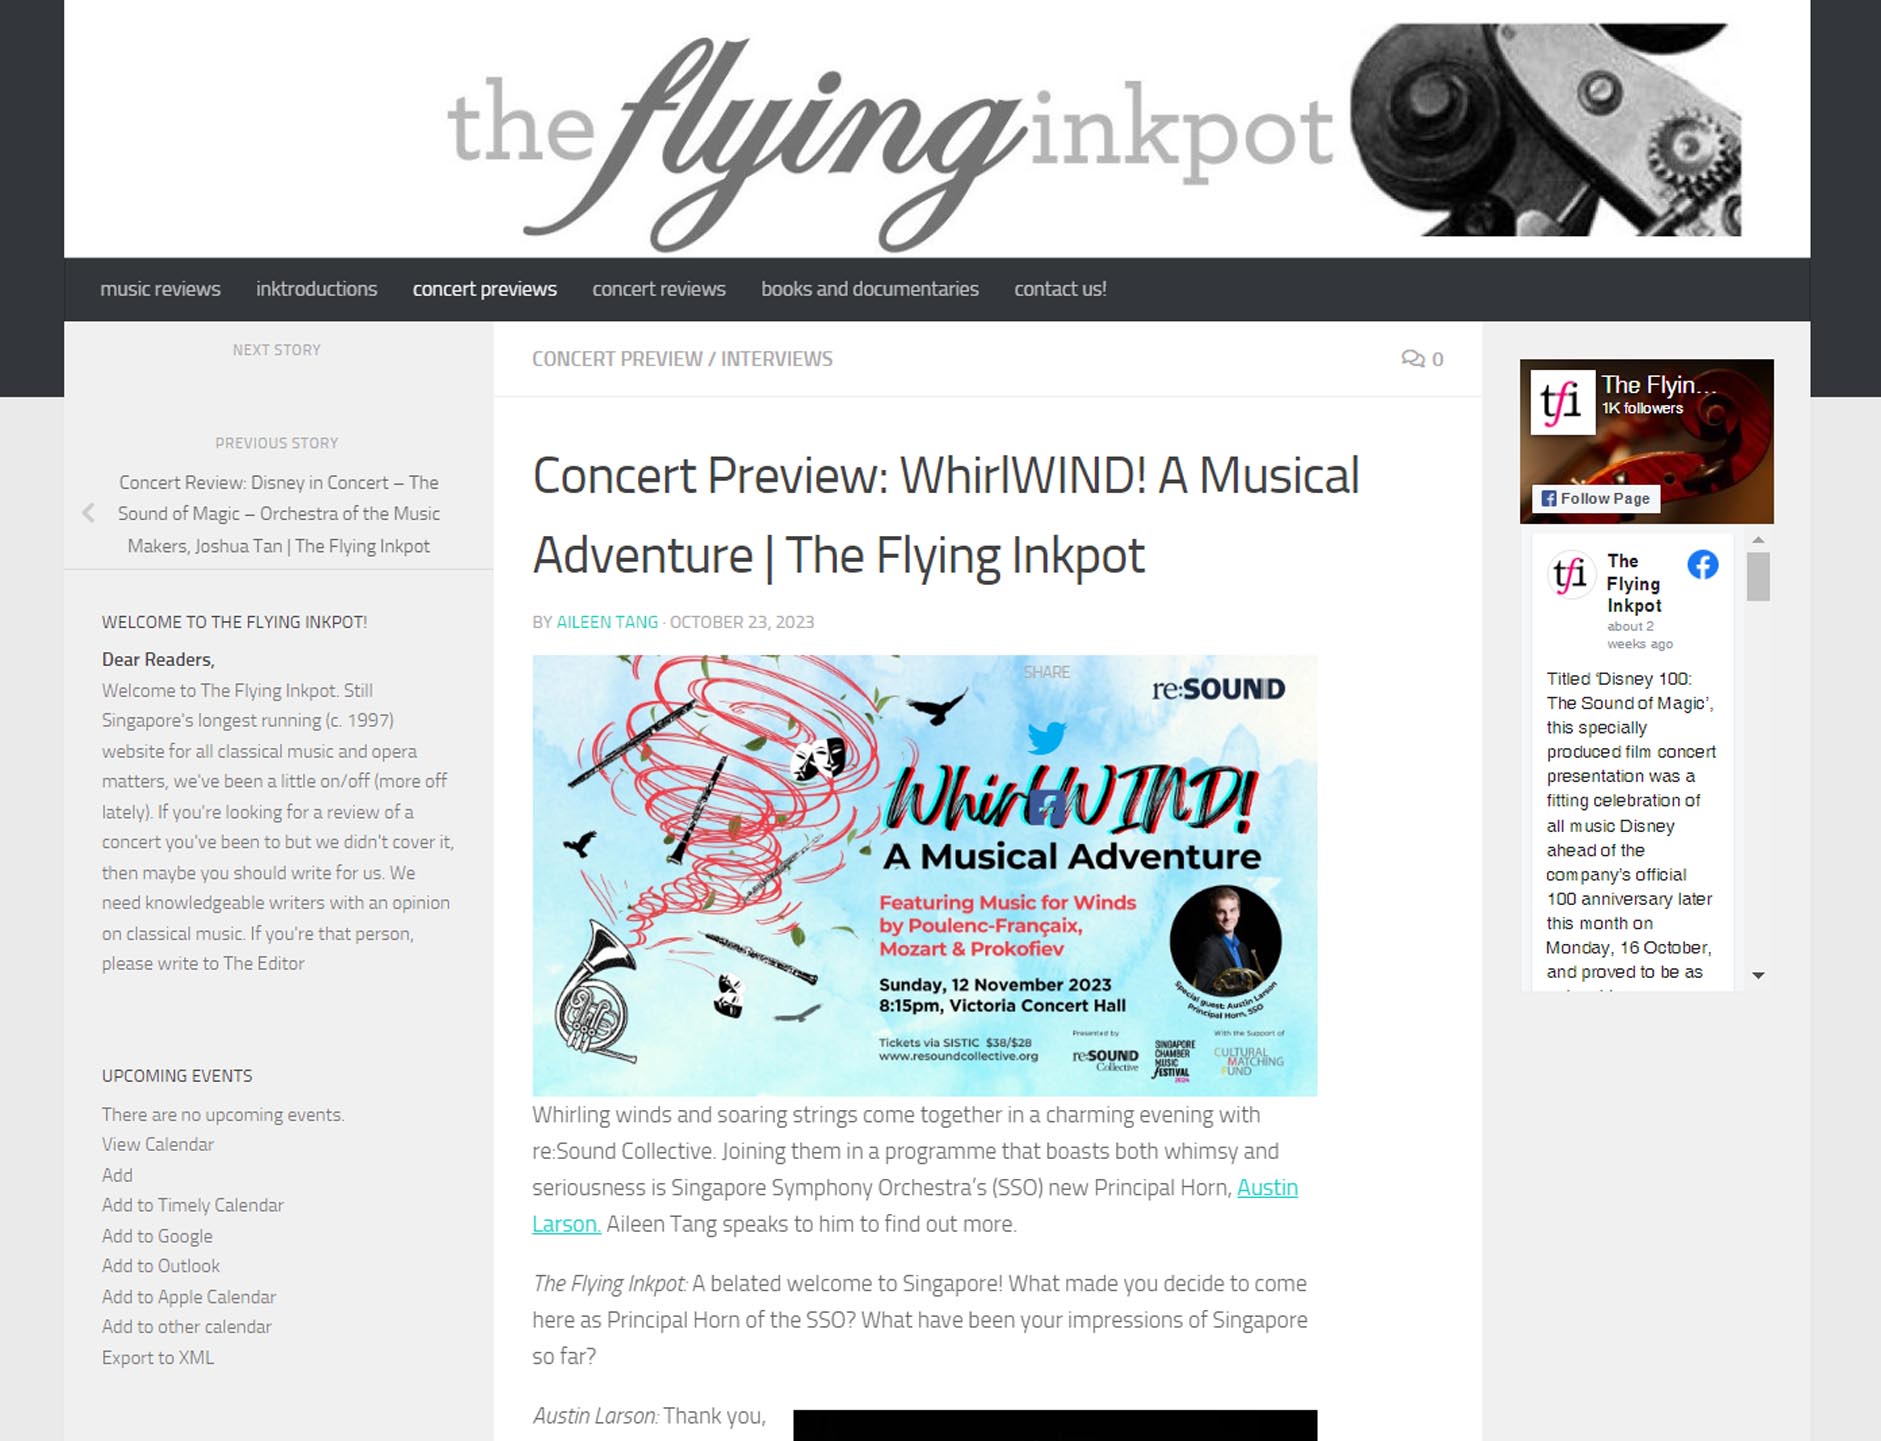 Concert Preview: WhirlWIND! A Musical Adventure | The Flying Inkpot